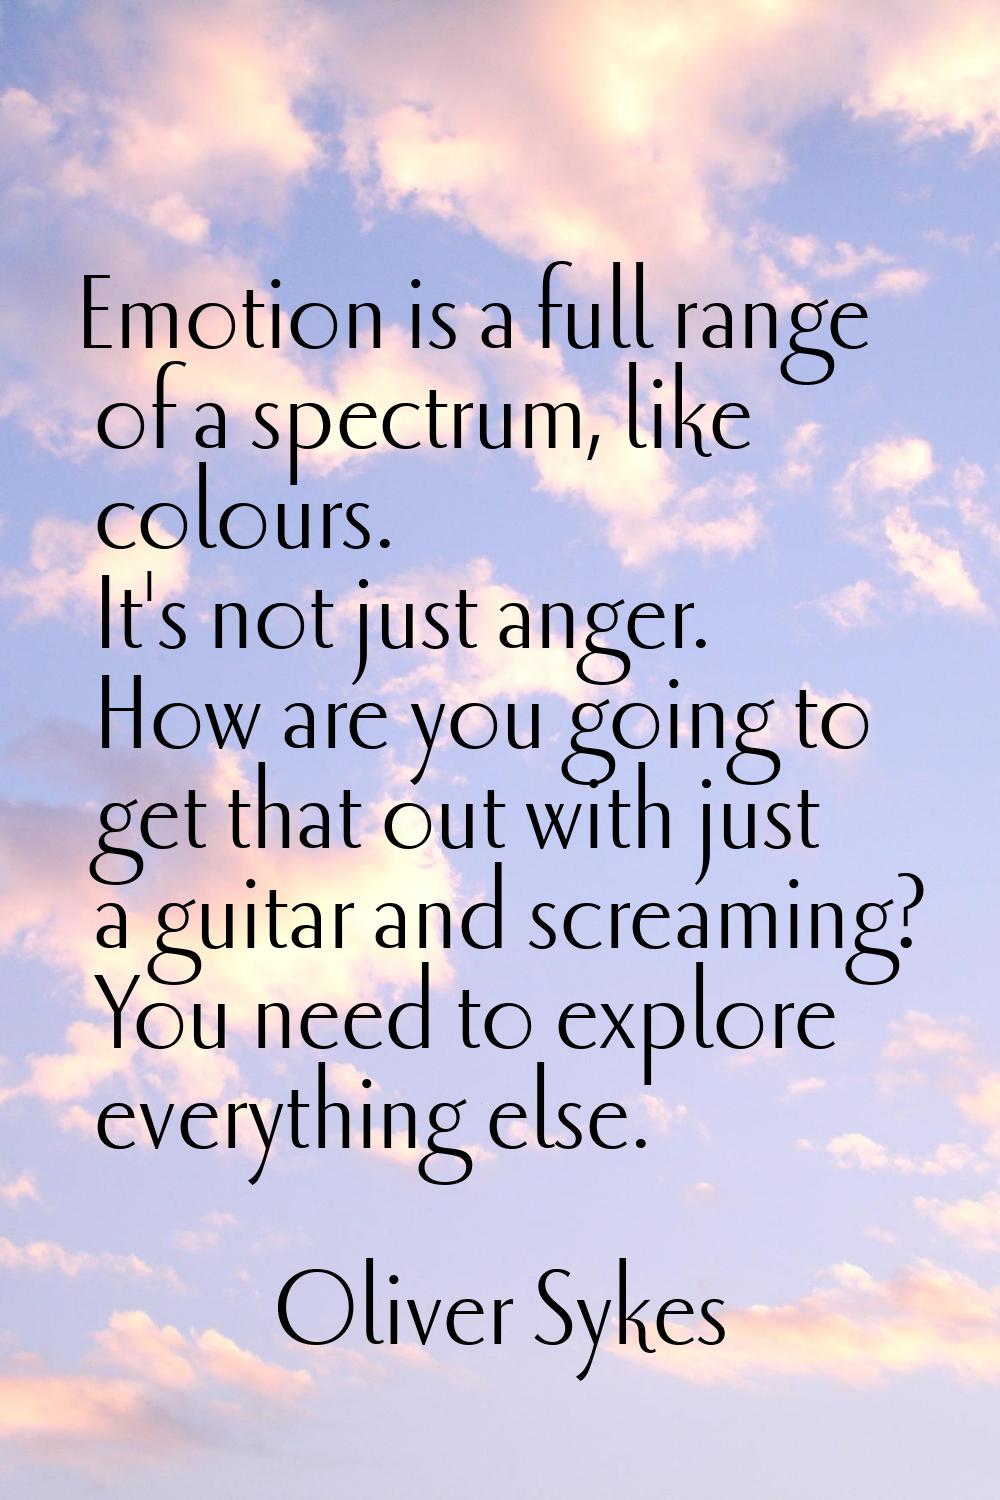 Emotion is a full range of a spectrum, like colours. It's not just anger. How are you going to get 